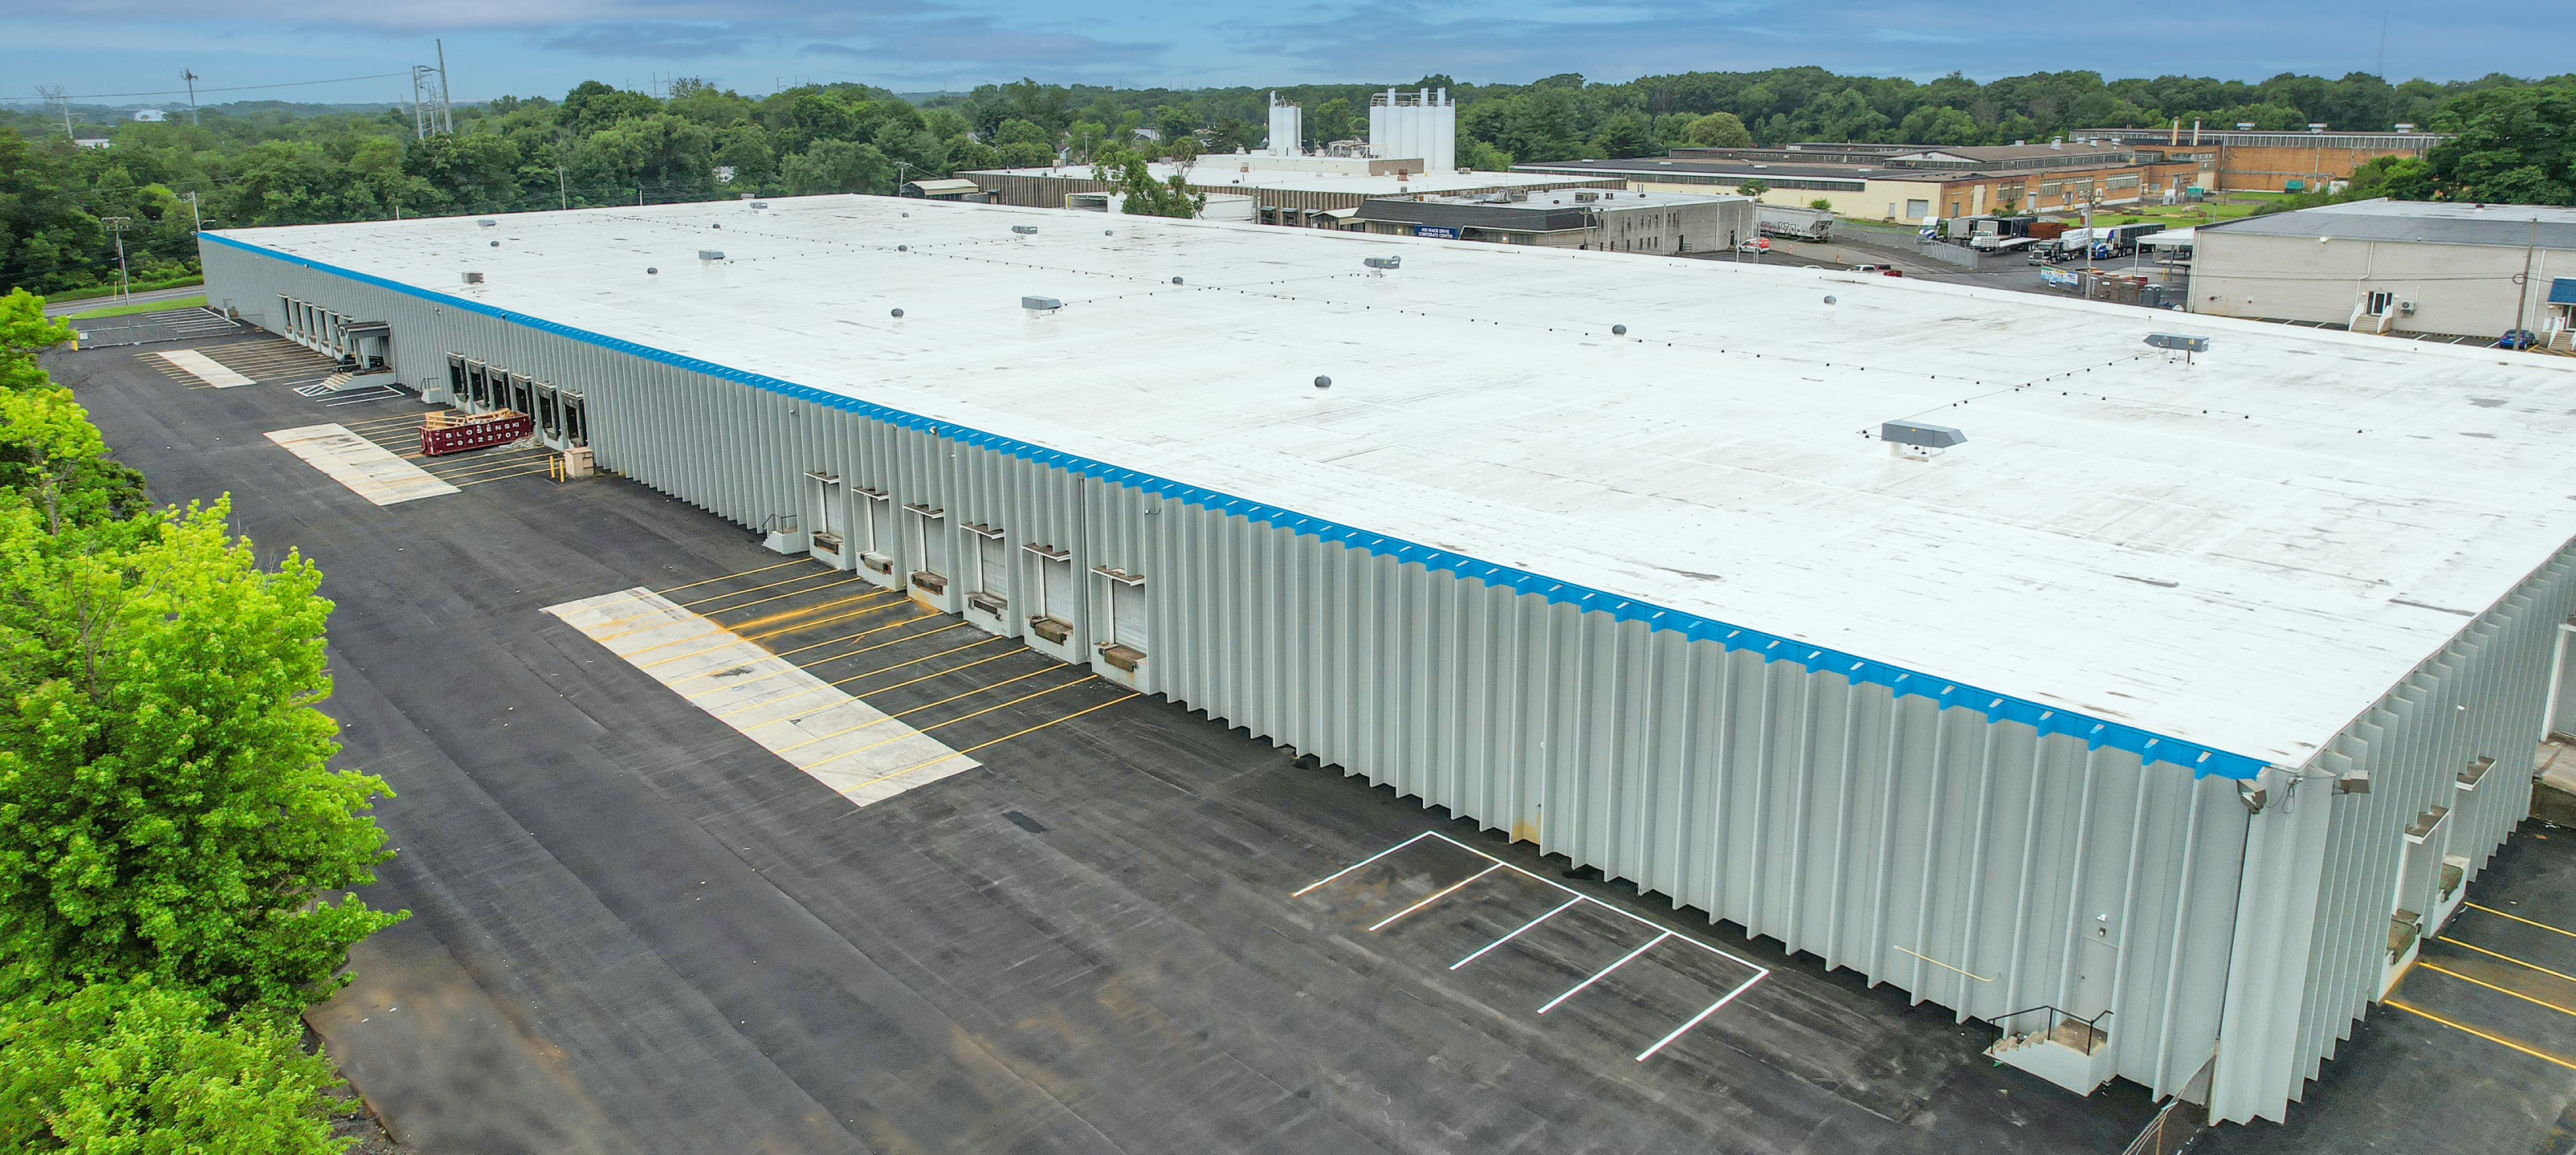 Bucks County logistics firm leases 200,000-square-foot Croydon building just 8 days after touring it